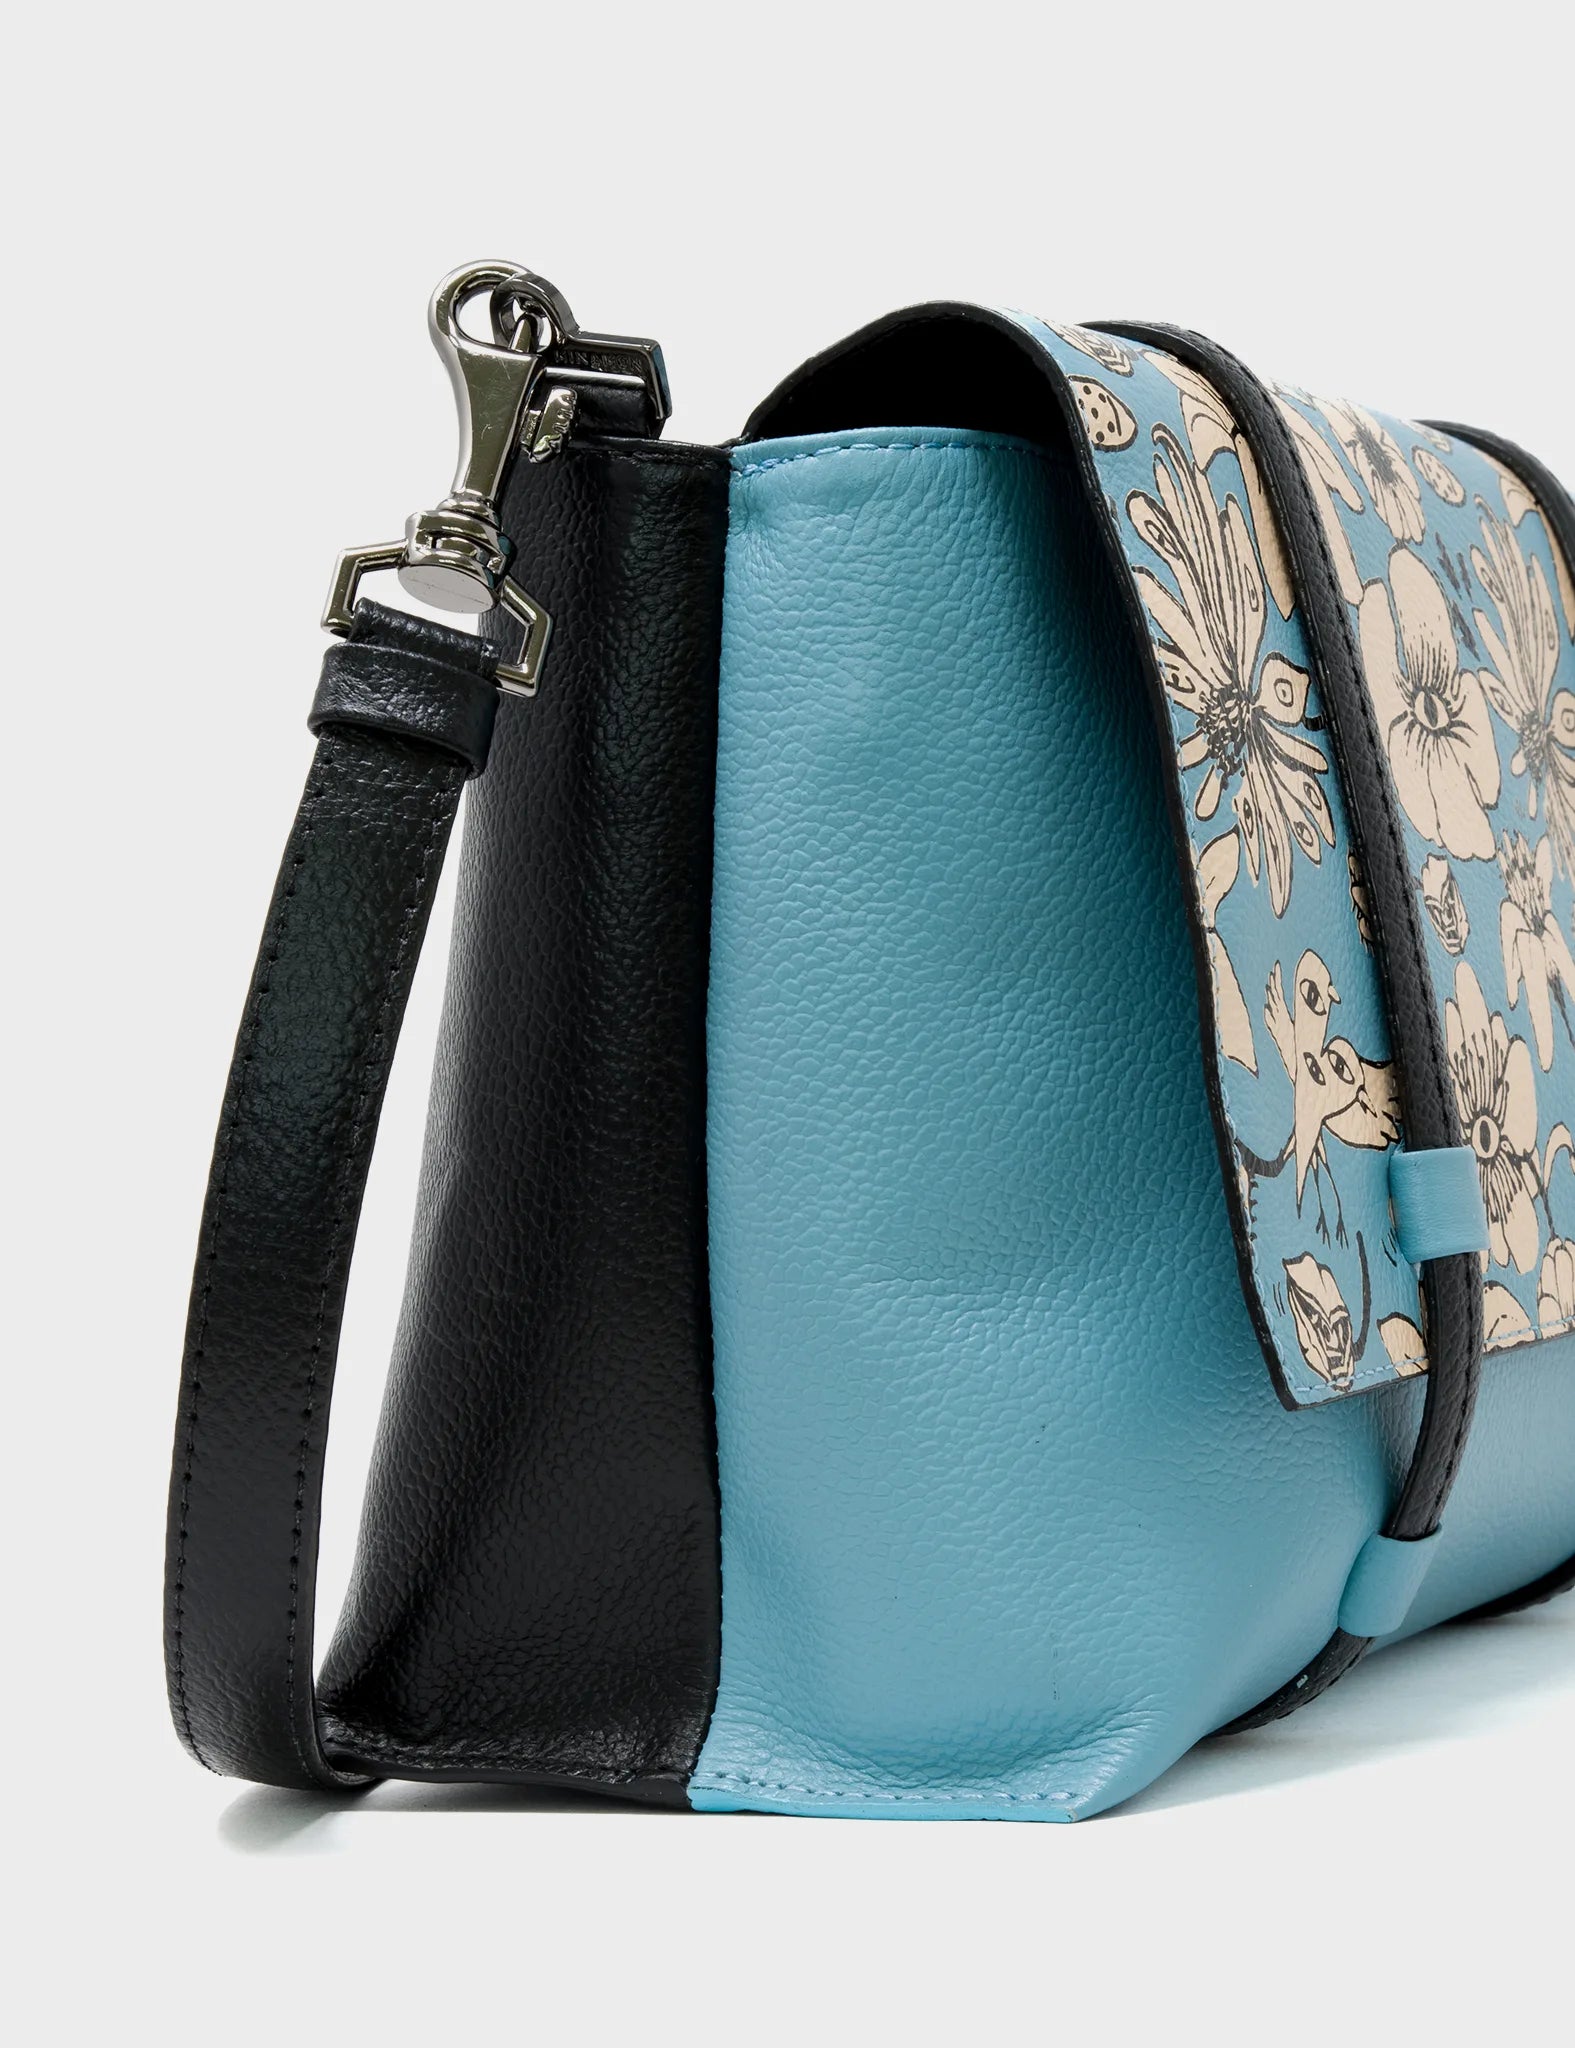 Reversible Small Messenger Bag Balck And Blue Leather - Floral Print - Side